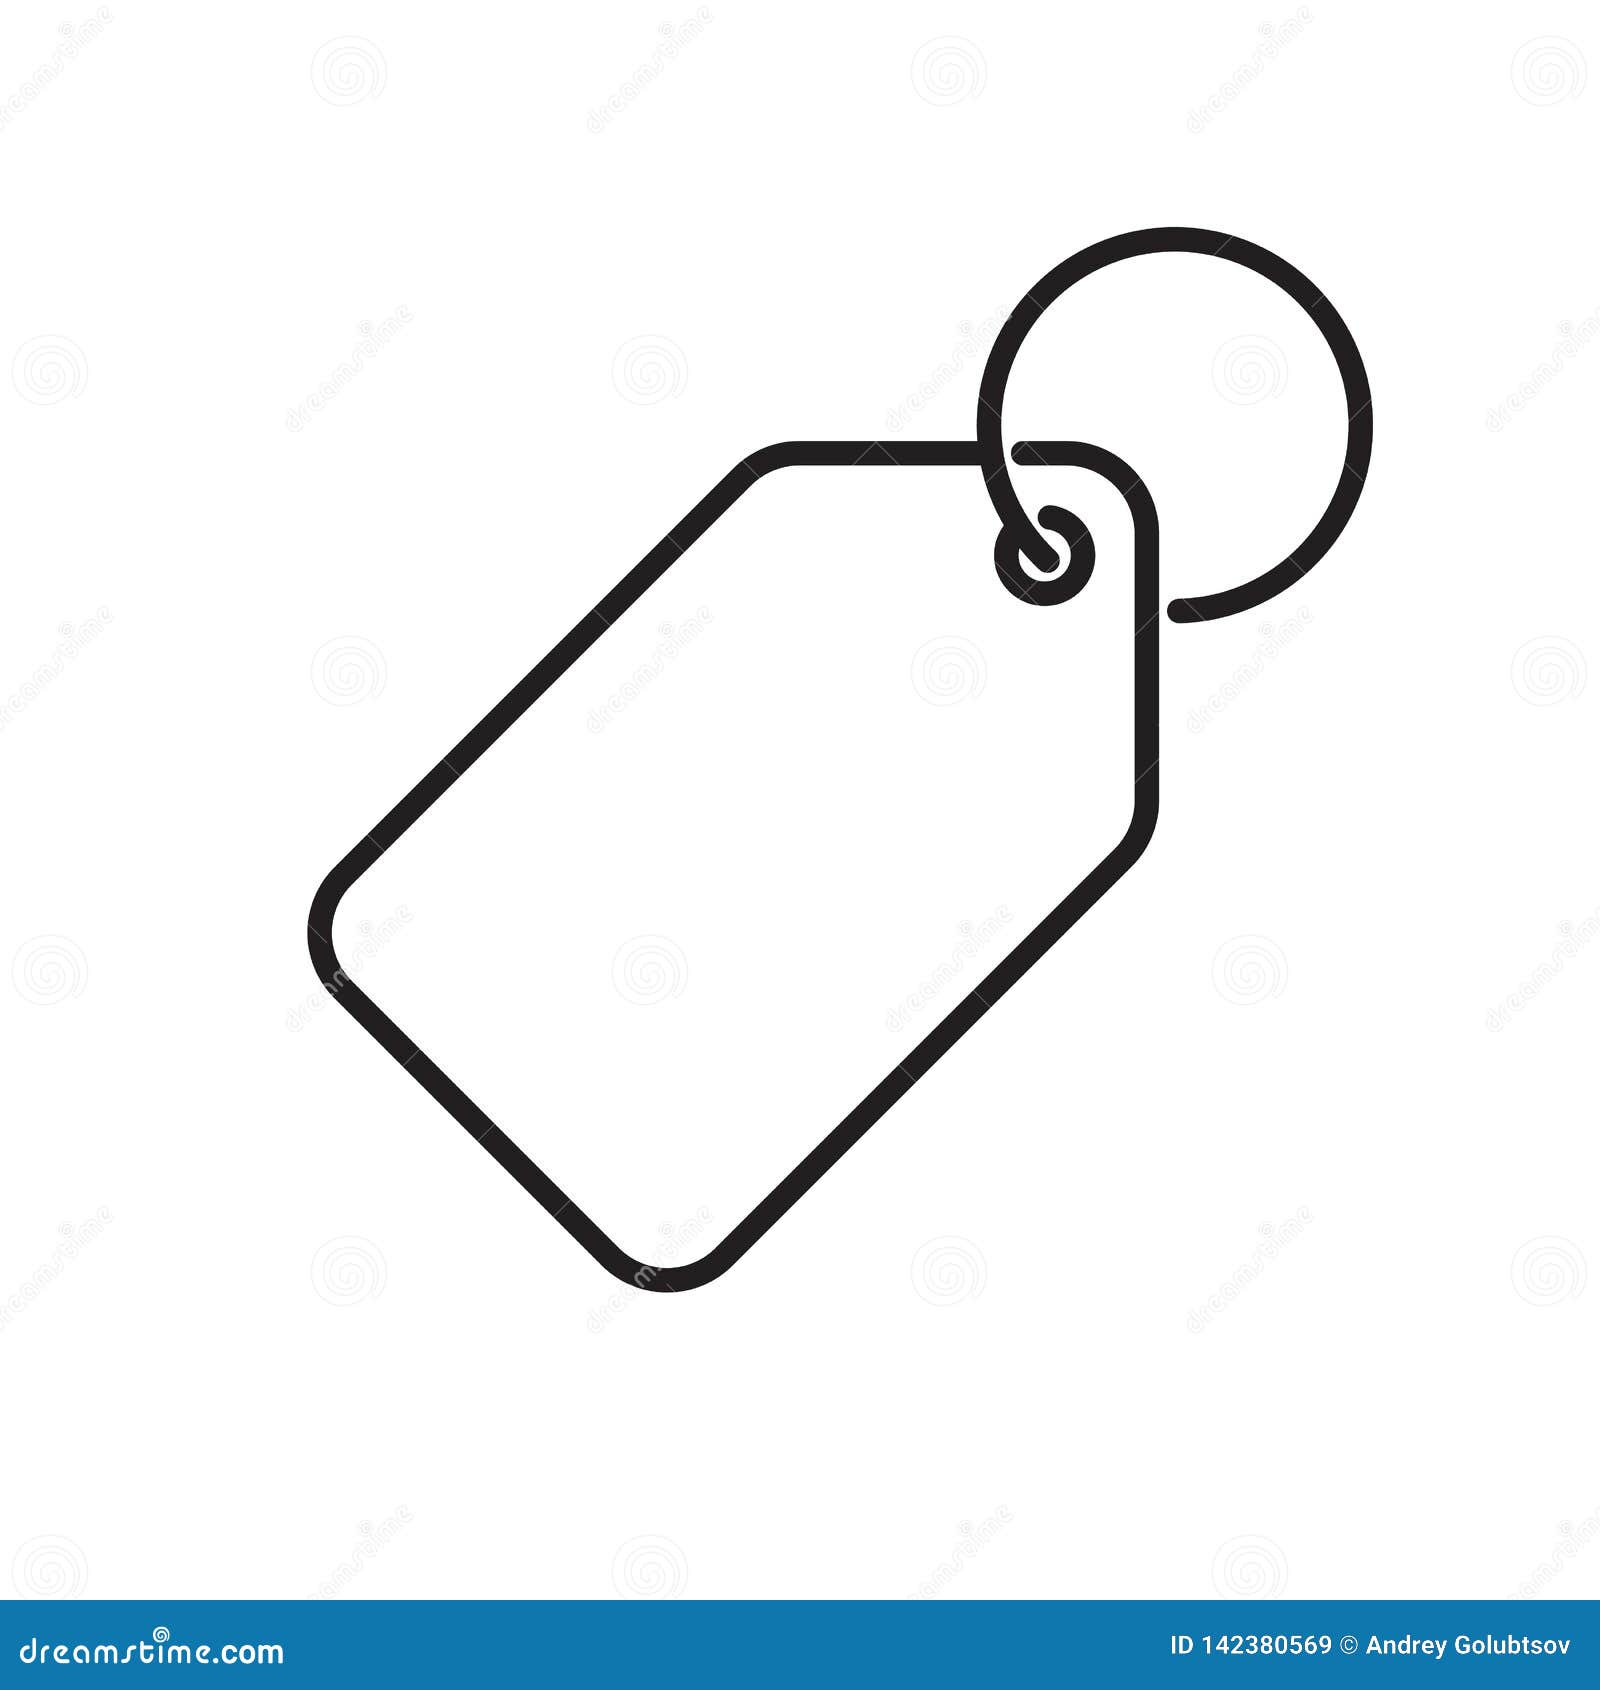 Price Tag Vector Icon Label. Pricetag with Ring, Luggage Tag or Keychain  Symbol Stock Vector - Illustration of craft, market: 142380569